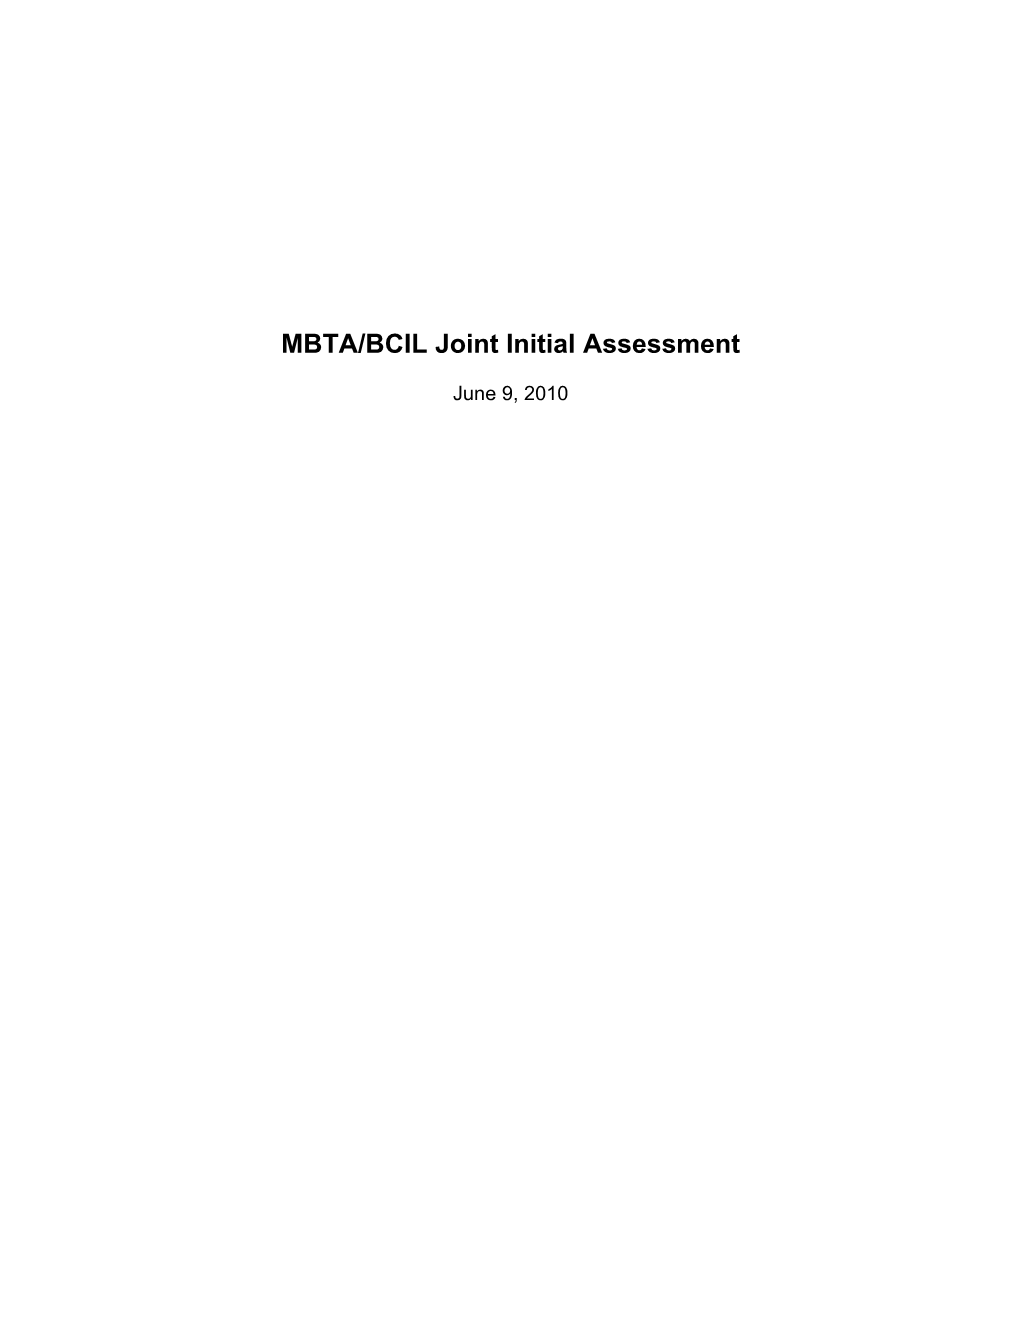 Outline for MBTA/BCIL Joint Assesment